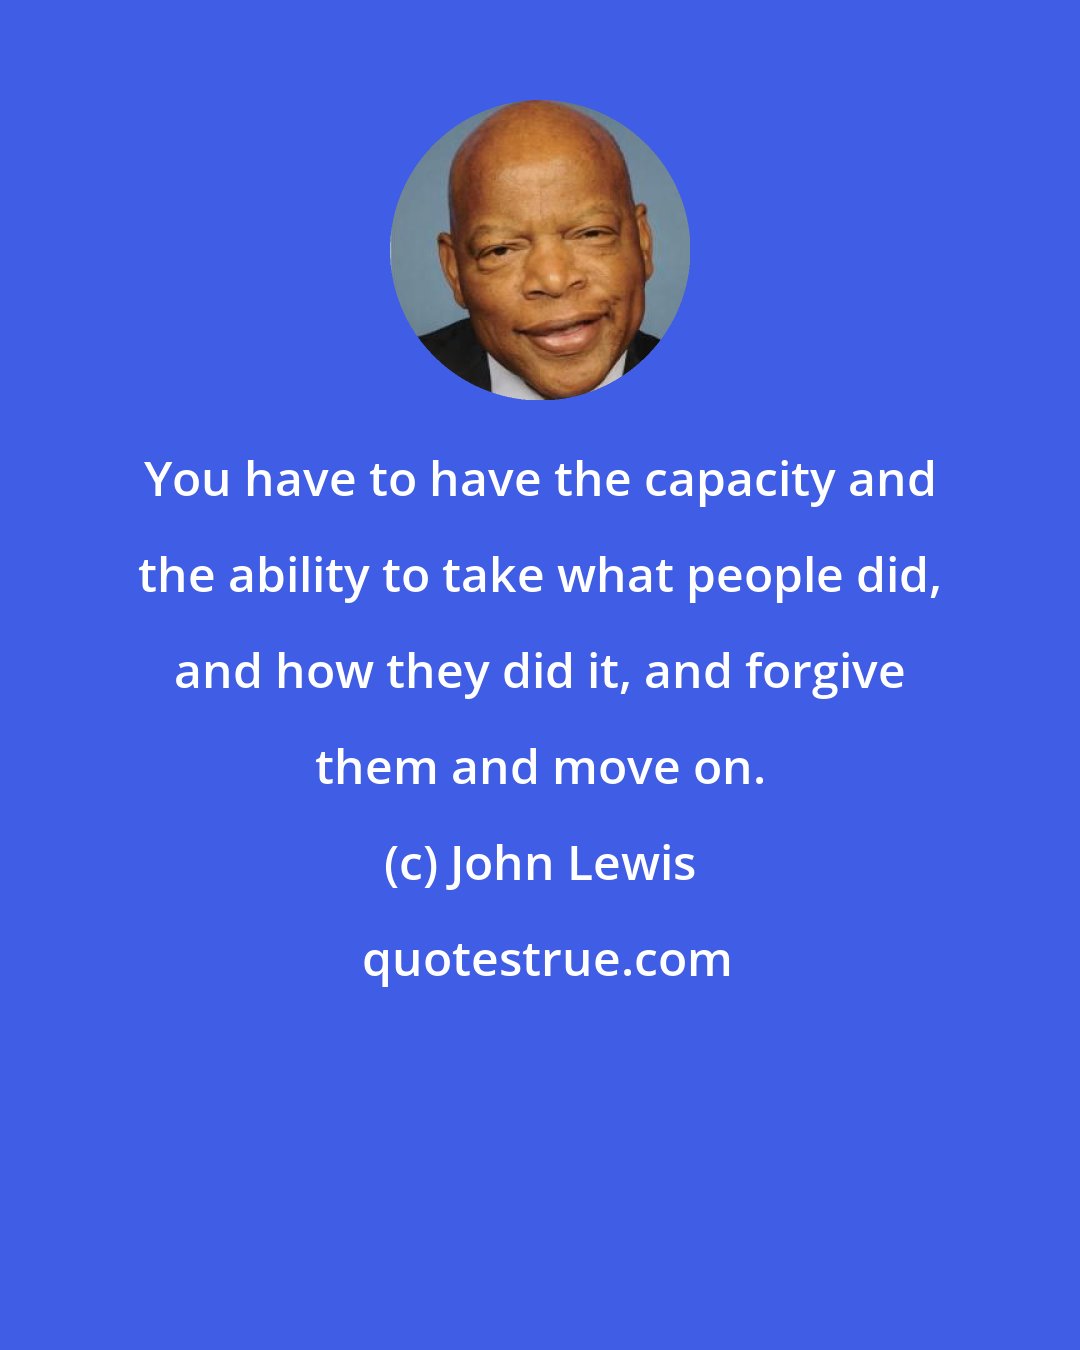 John Lewis: You have to have the capacity and the ability to take what people did, and how they did it, and forgive them and move on.